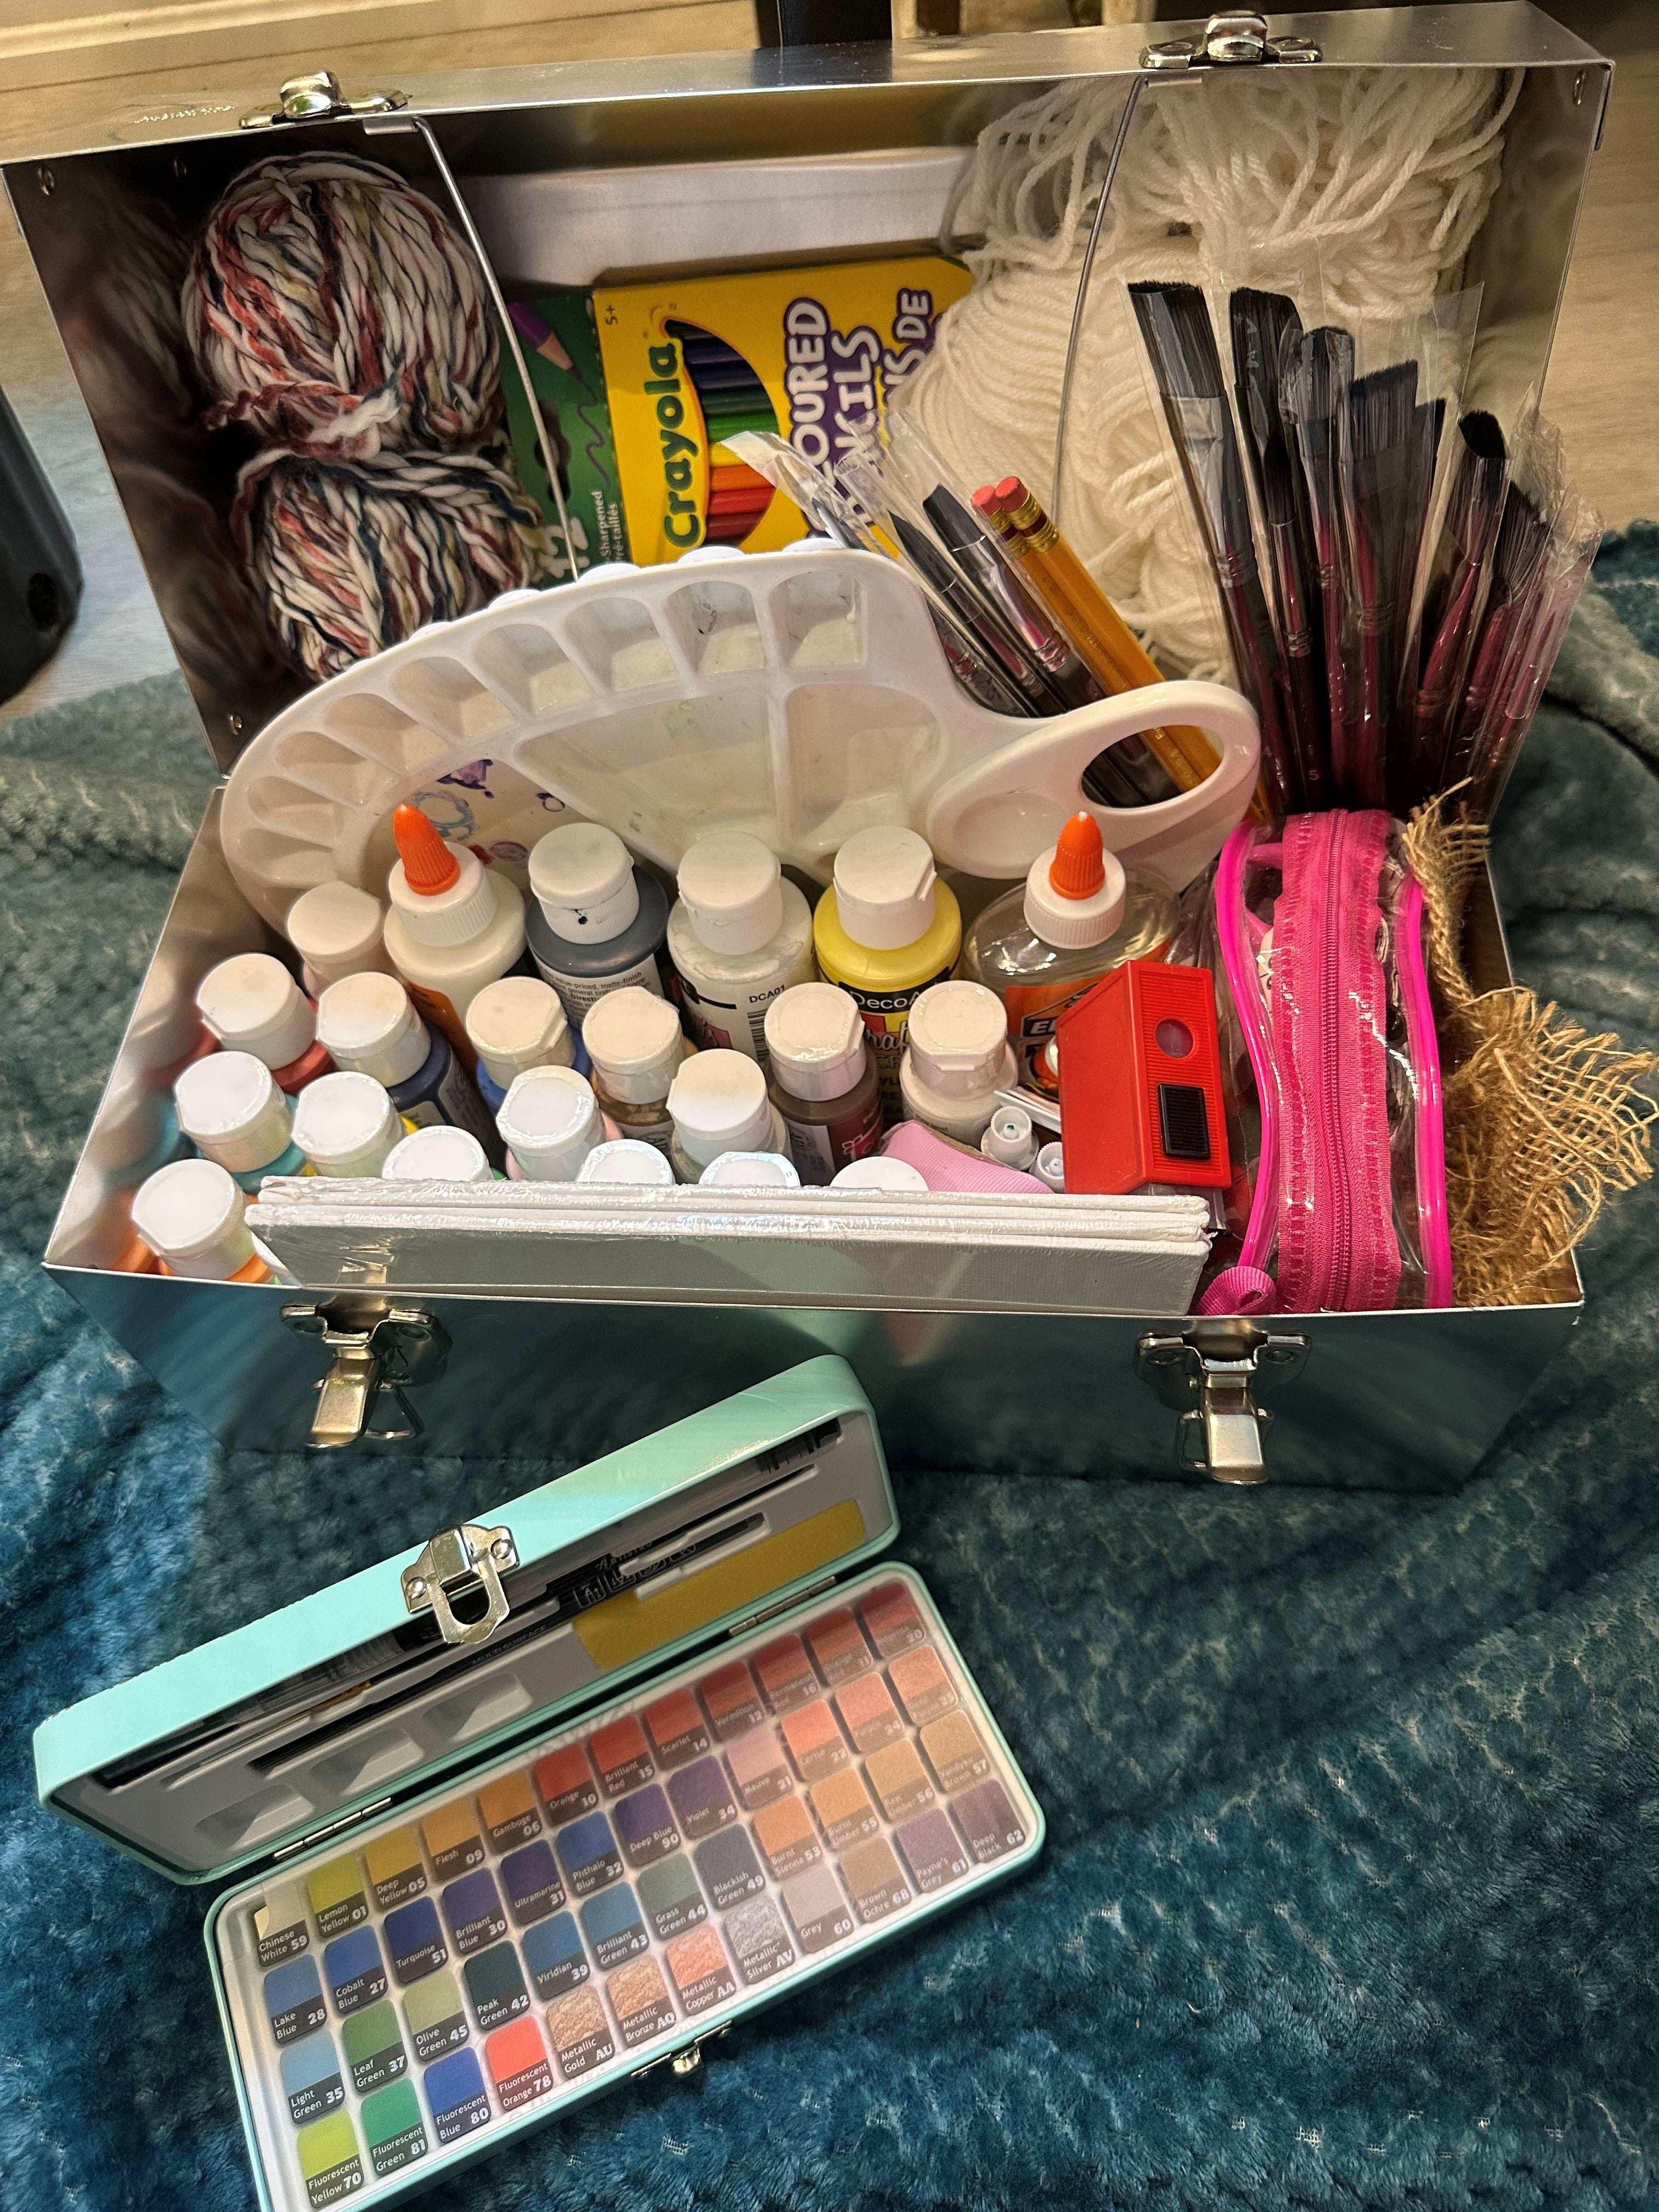 L.May lunchbox with art supplies. Paint, brushes, crafts